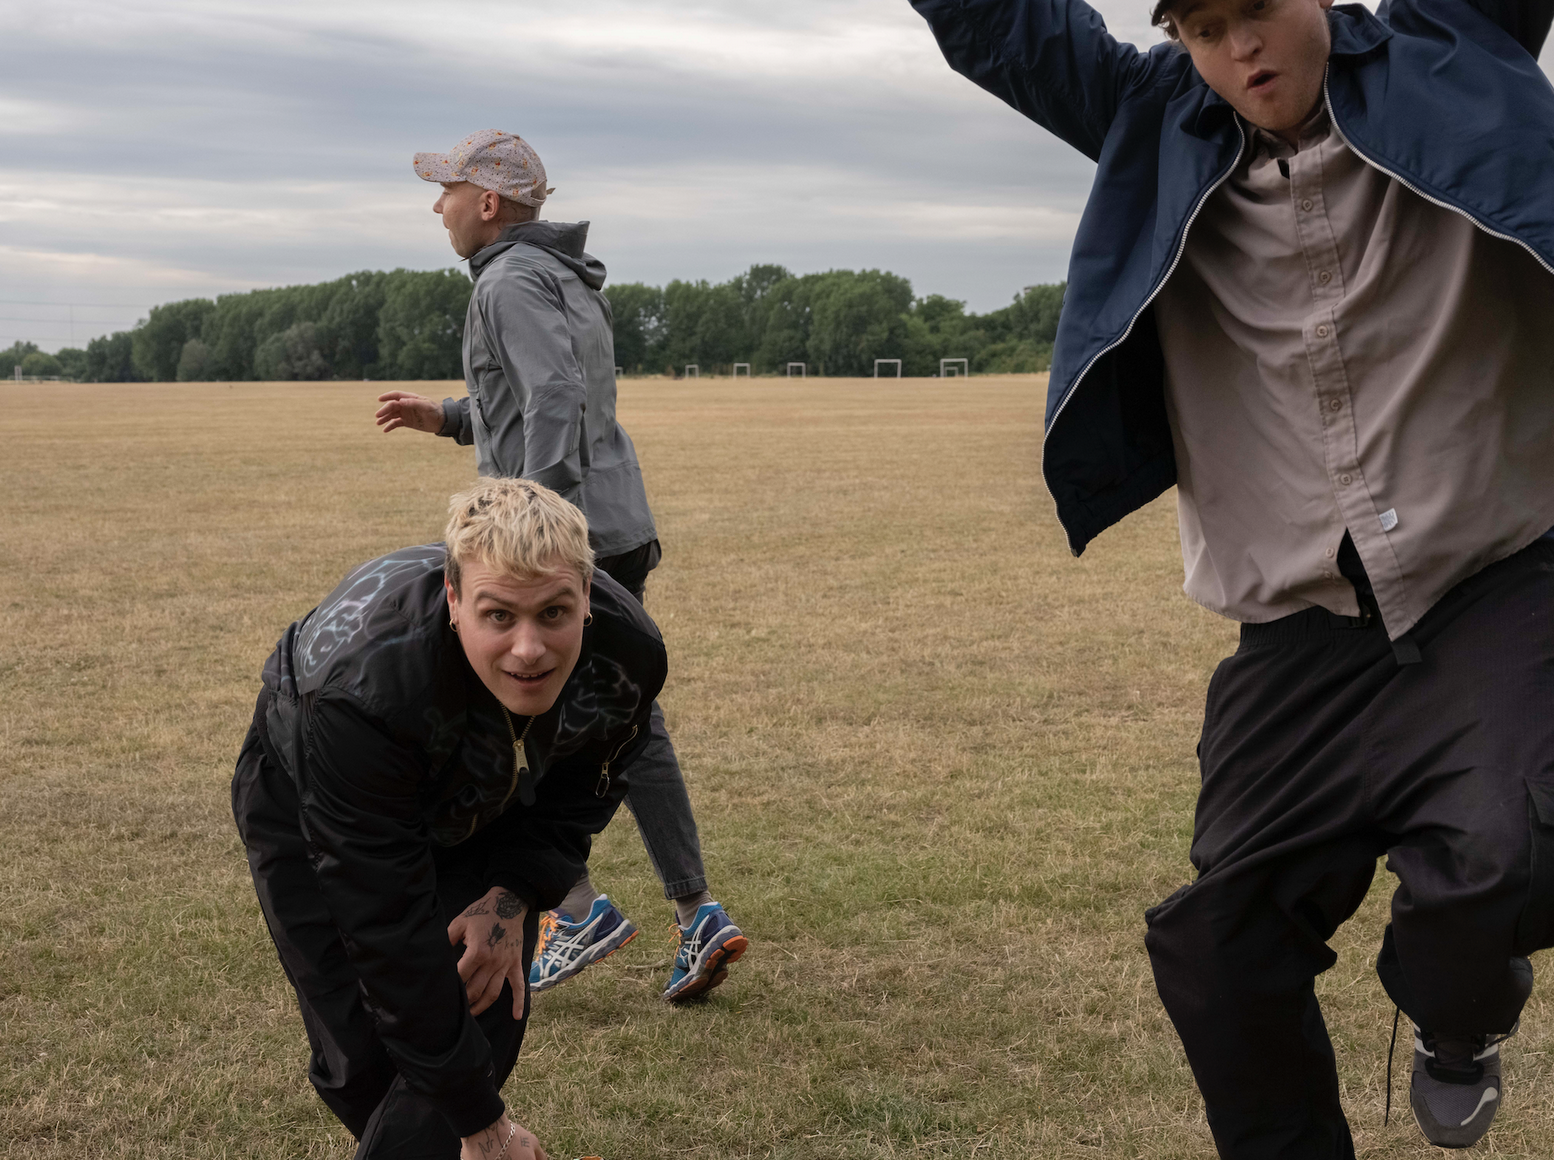 DMA’S SHARE EUPHORIC NEW SINGLE ‘FADING LIKE A PICTURE’